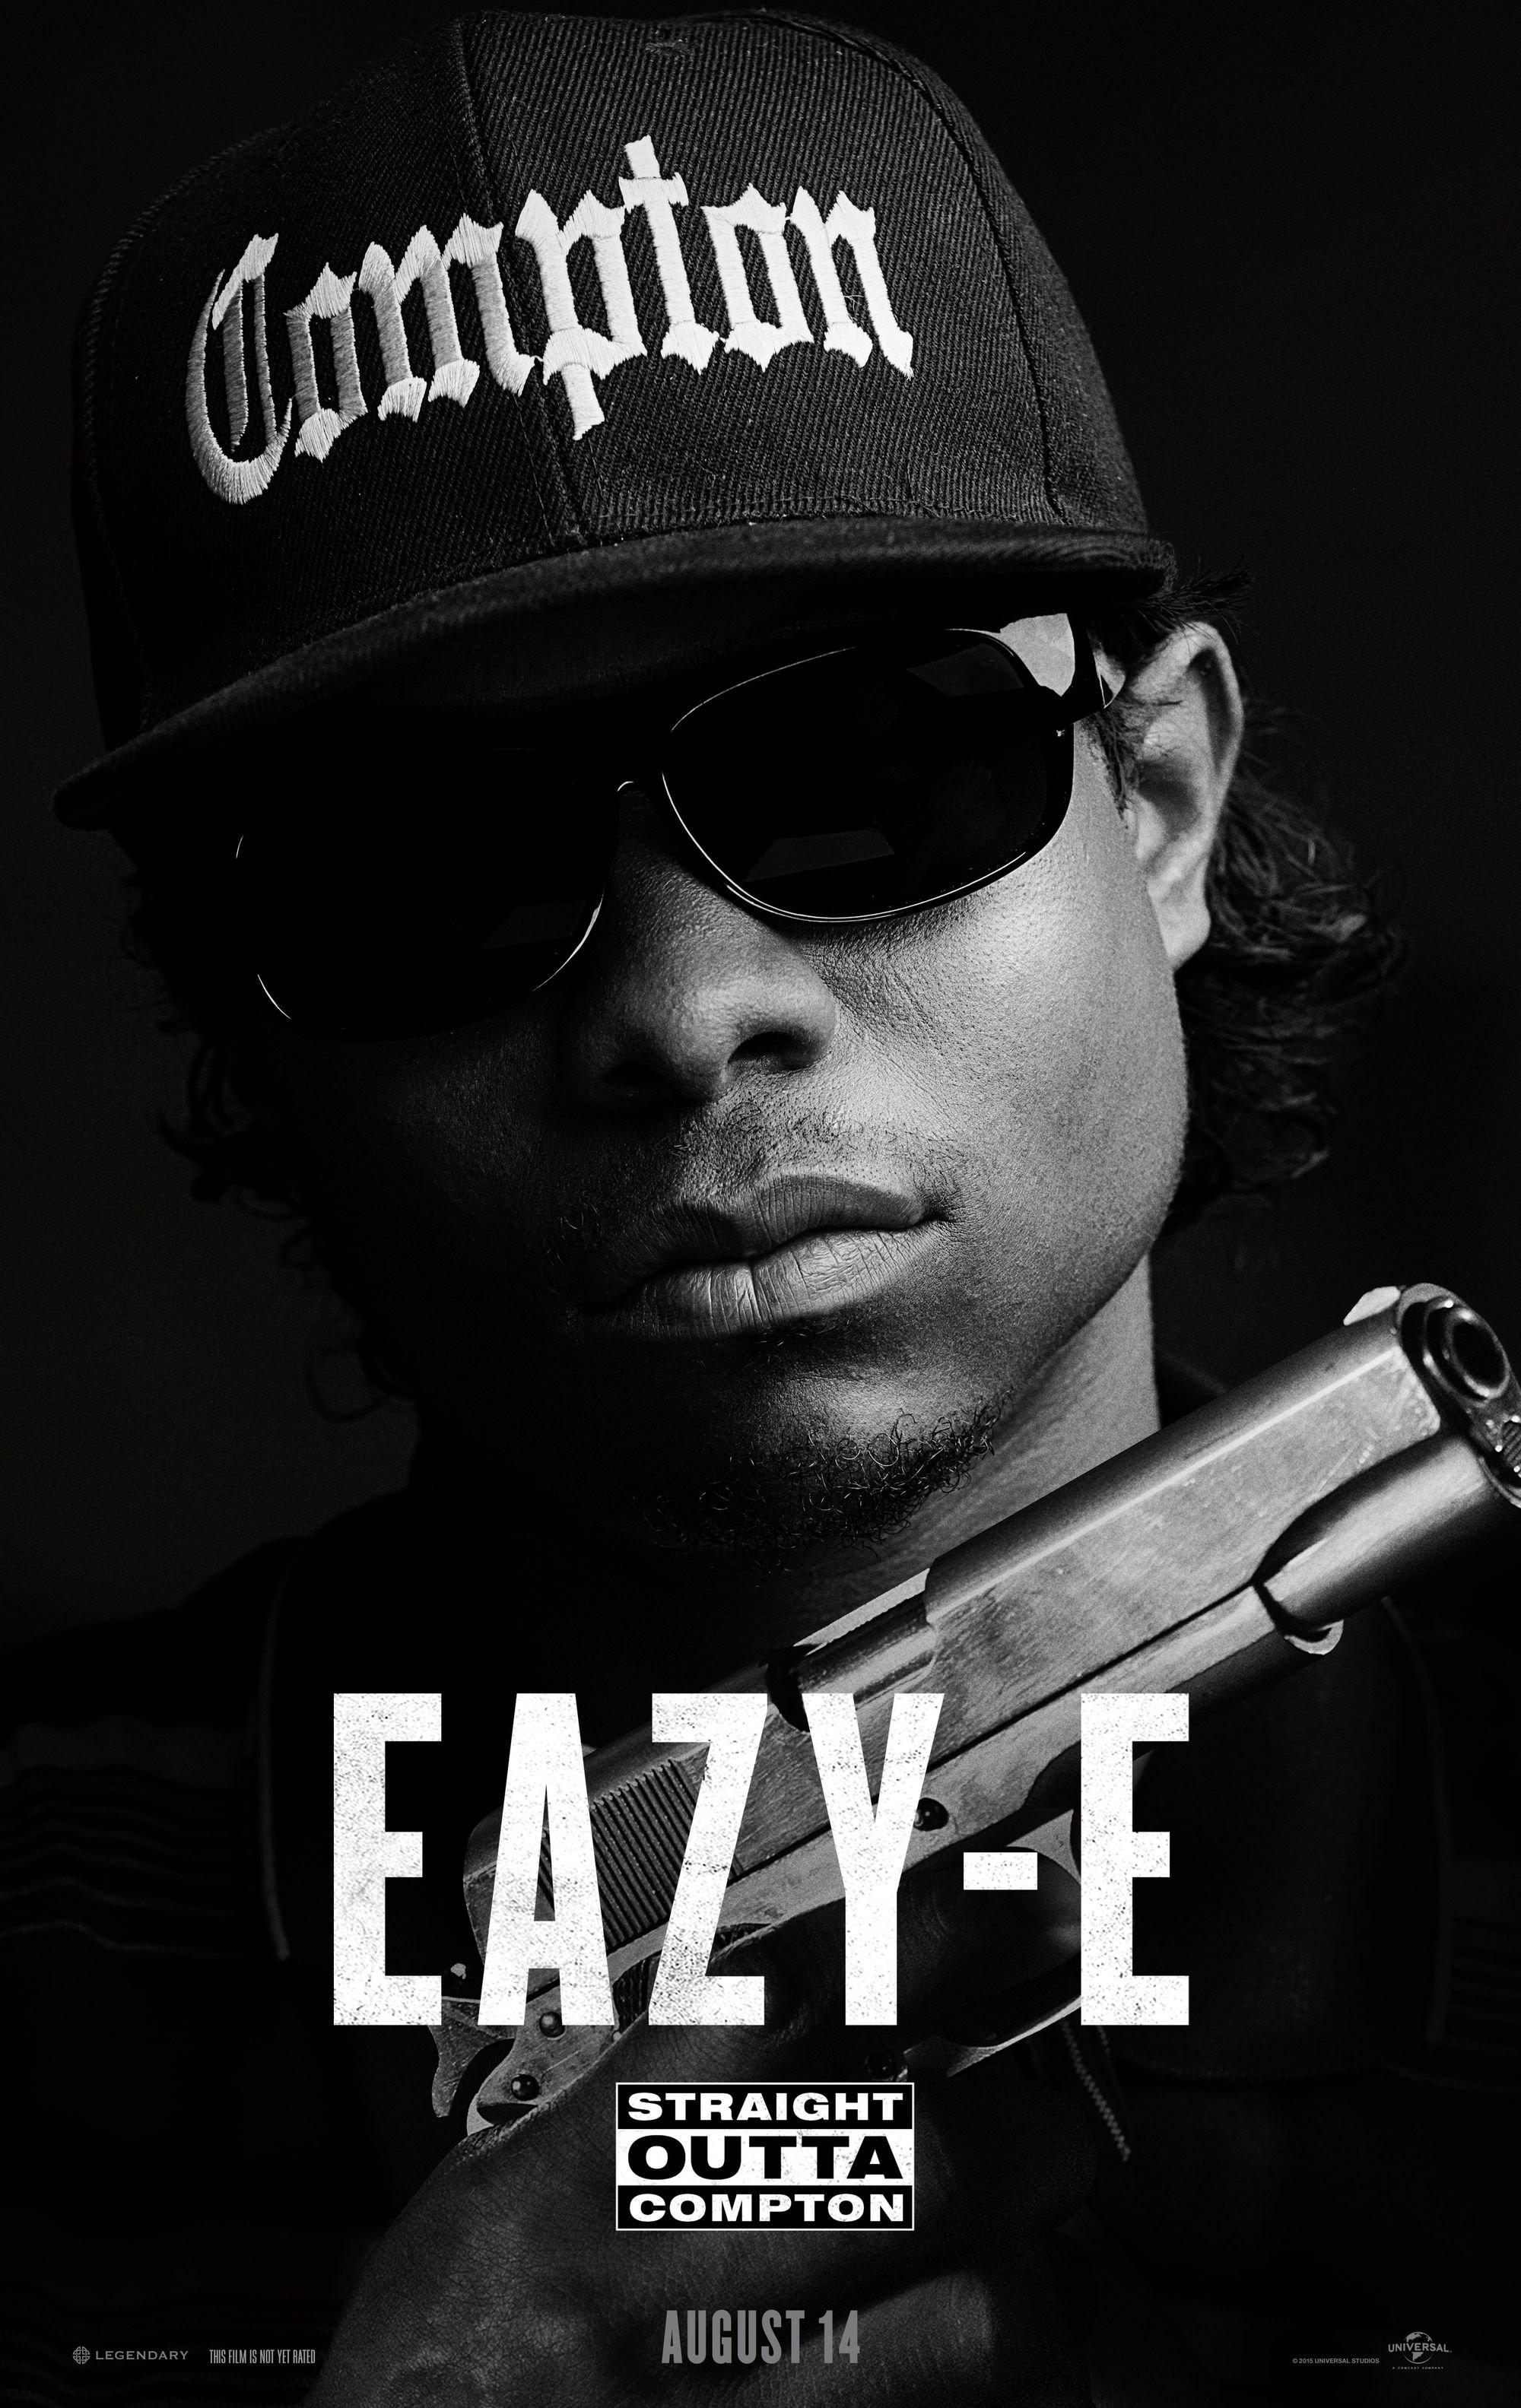 Rap Wallpaper Iphone - Eazy E Straight Outta Compton Poster , HD Wallpaper & Backgrounds